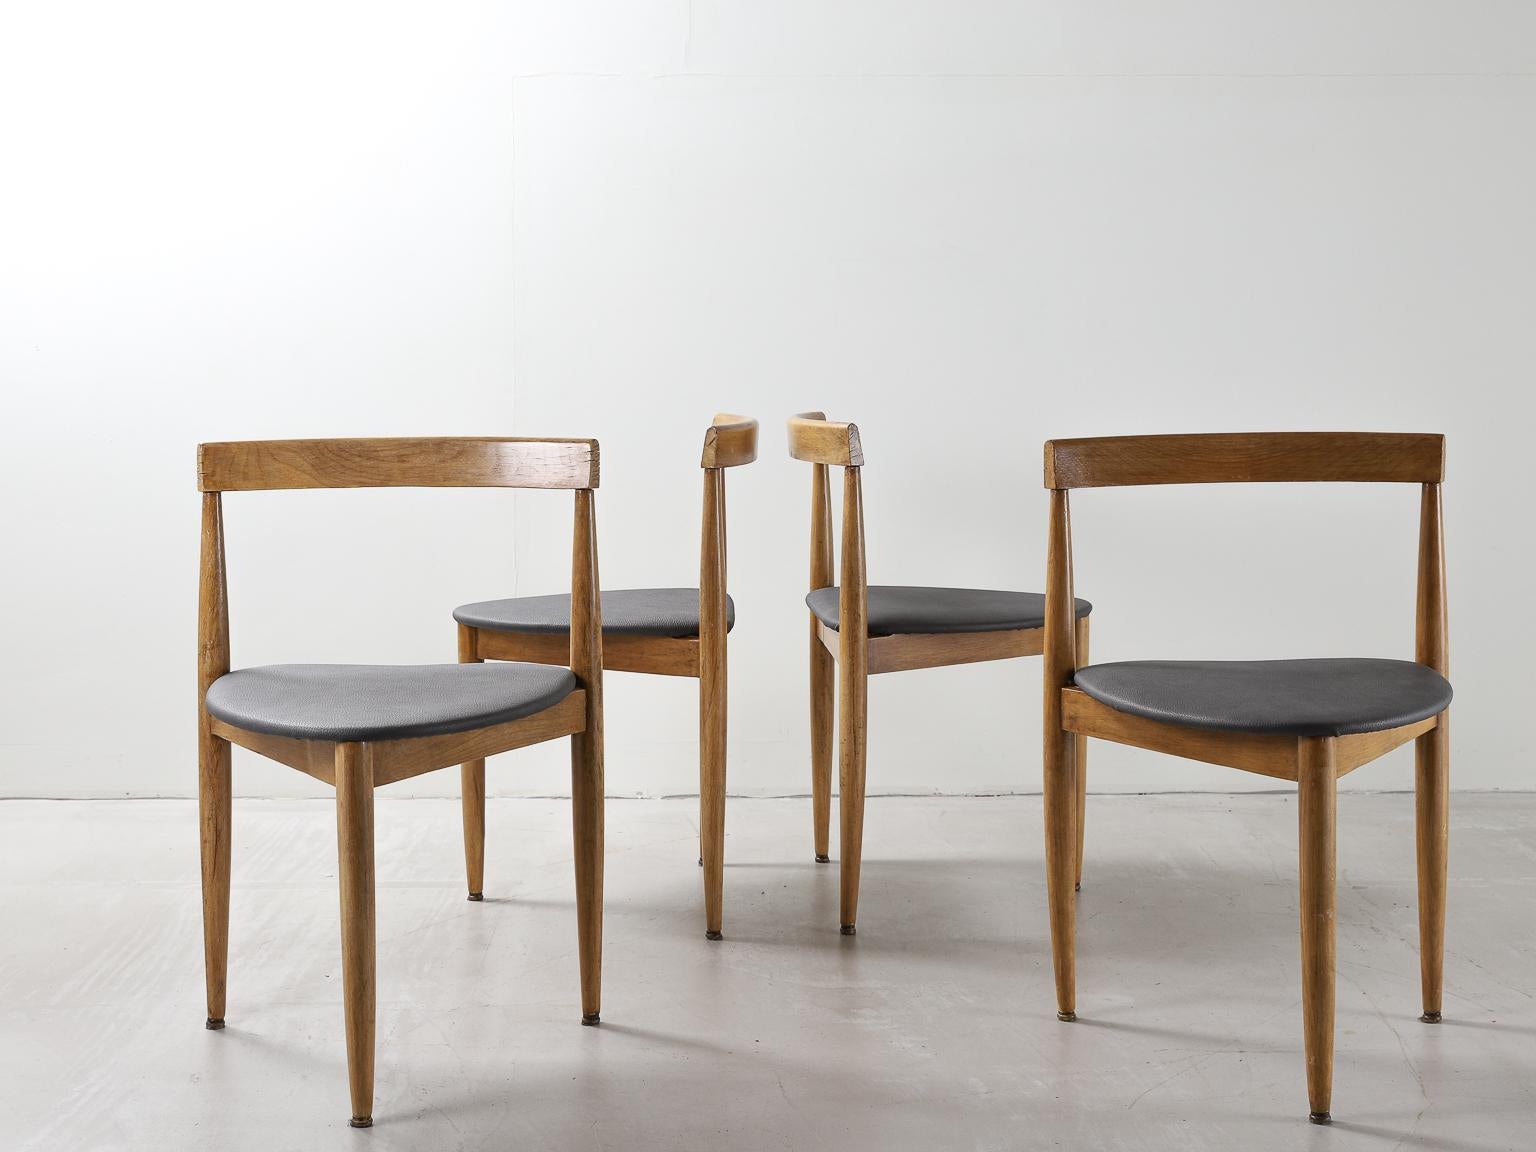 A set of four wood and leather side or dining chairs designed and made in Denmark by Hans Olsen for manufacturer Frem Røjle. 

Leather has been reupholstered to in a green leather. 

Hans Olsen (1919-1992) was a Danish furniture designer who